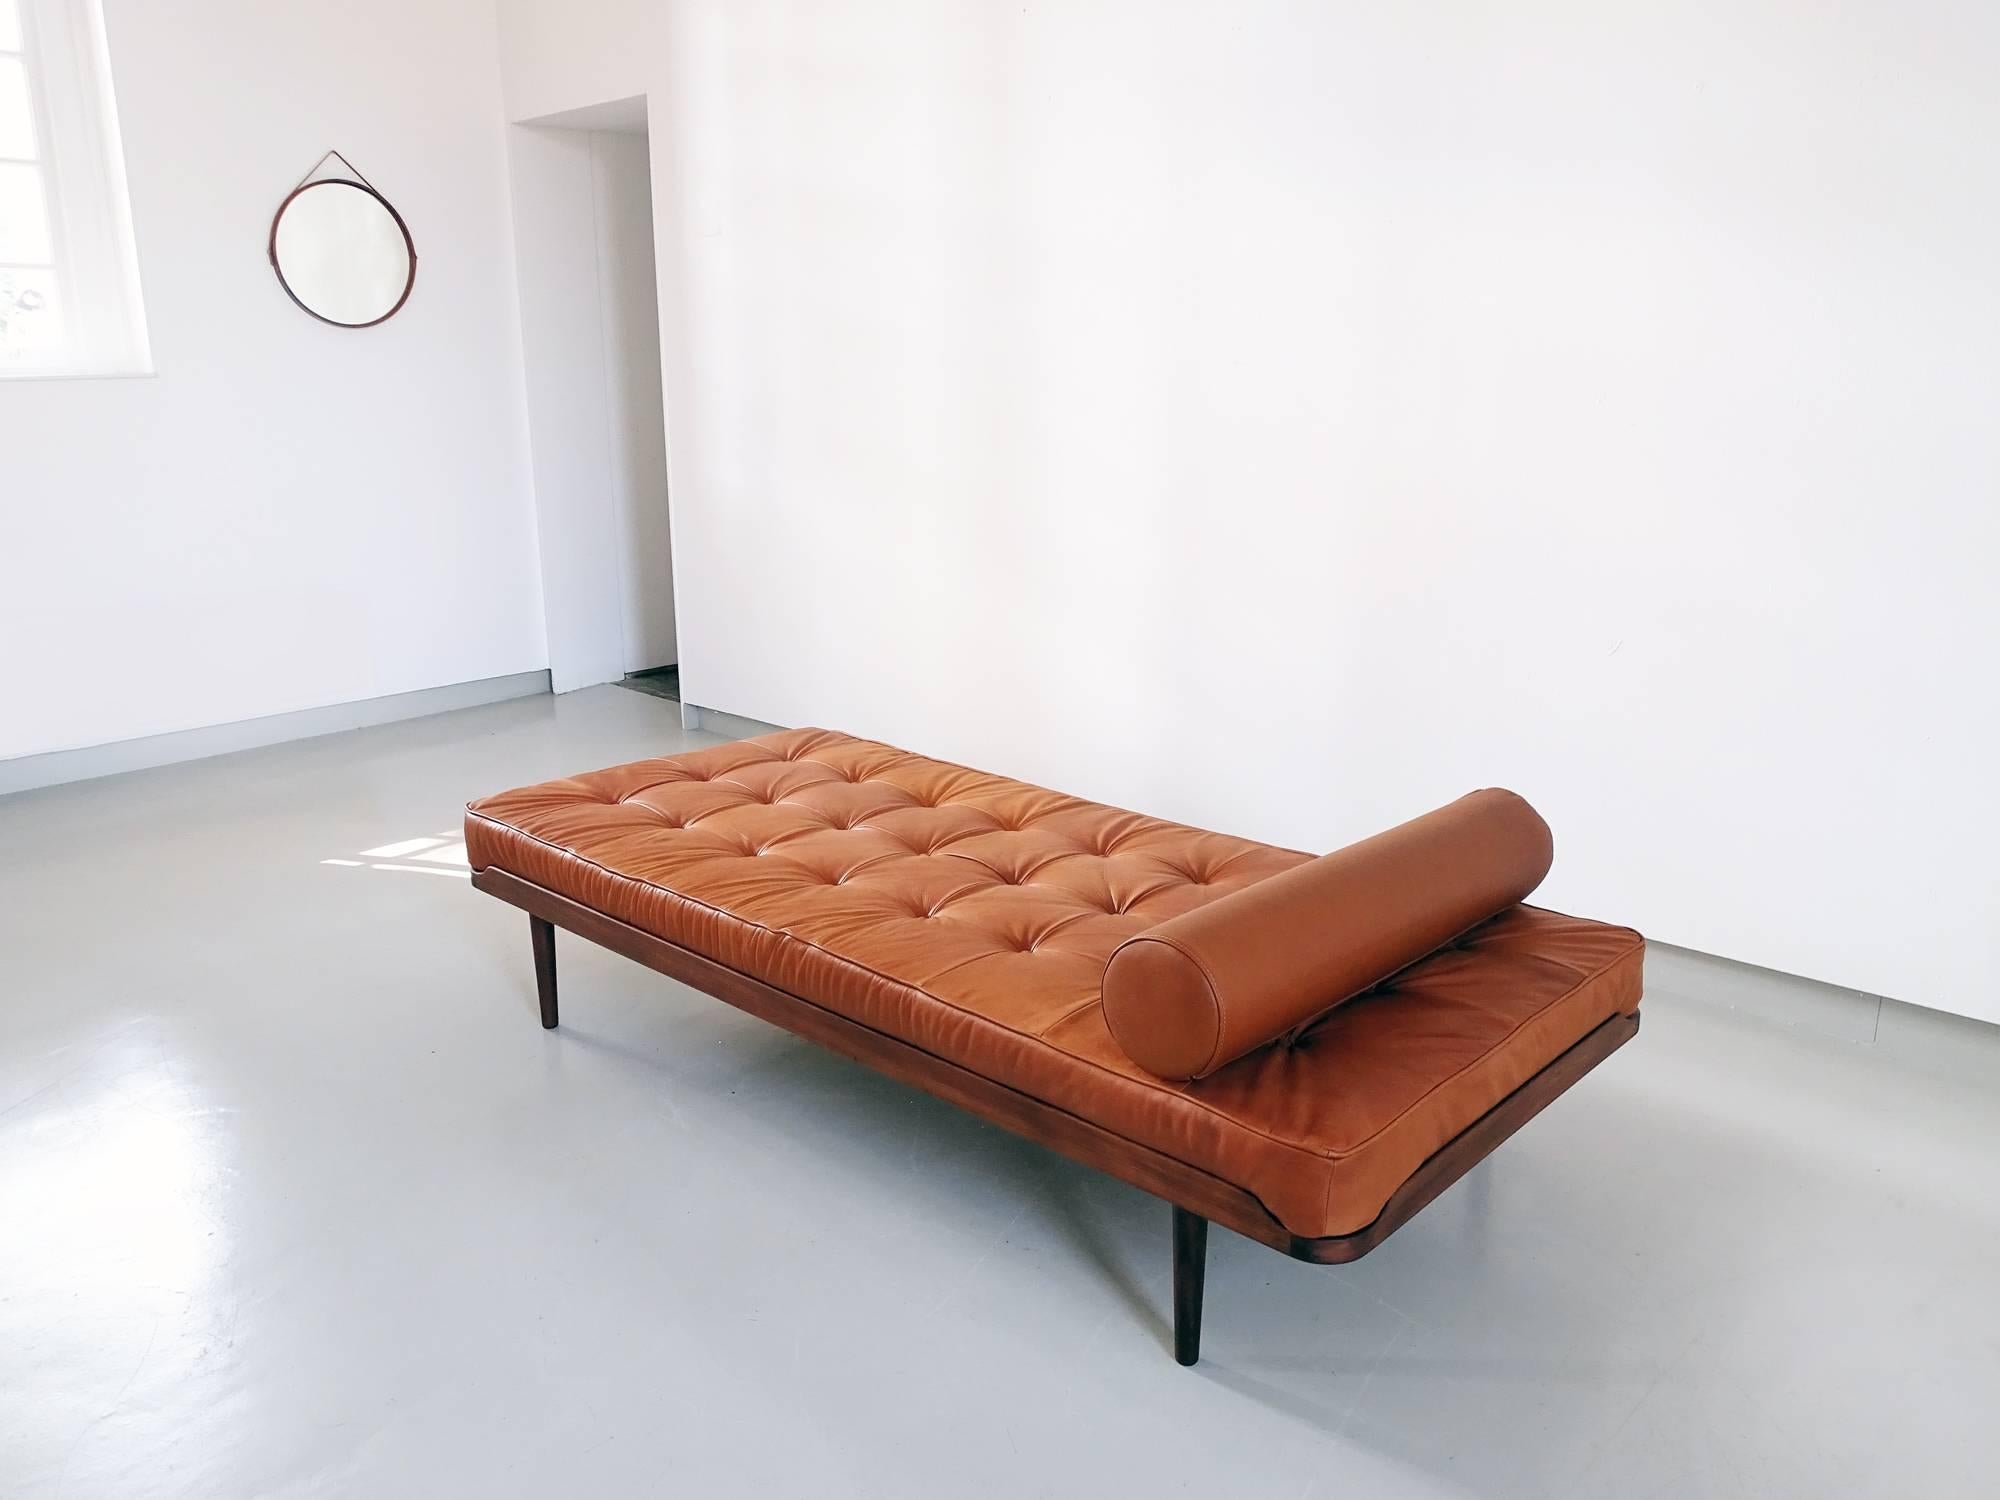 Daybed designed by Grete Jalk manufactured by Danish cabinetmaker P. Jeppesen, Denmark, circa 1950. The daybed is executed in solid teak wood and a slatted oak wood frame. Beautiful rounded edges en curved corner details give this classic Danish